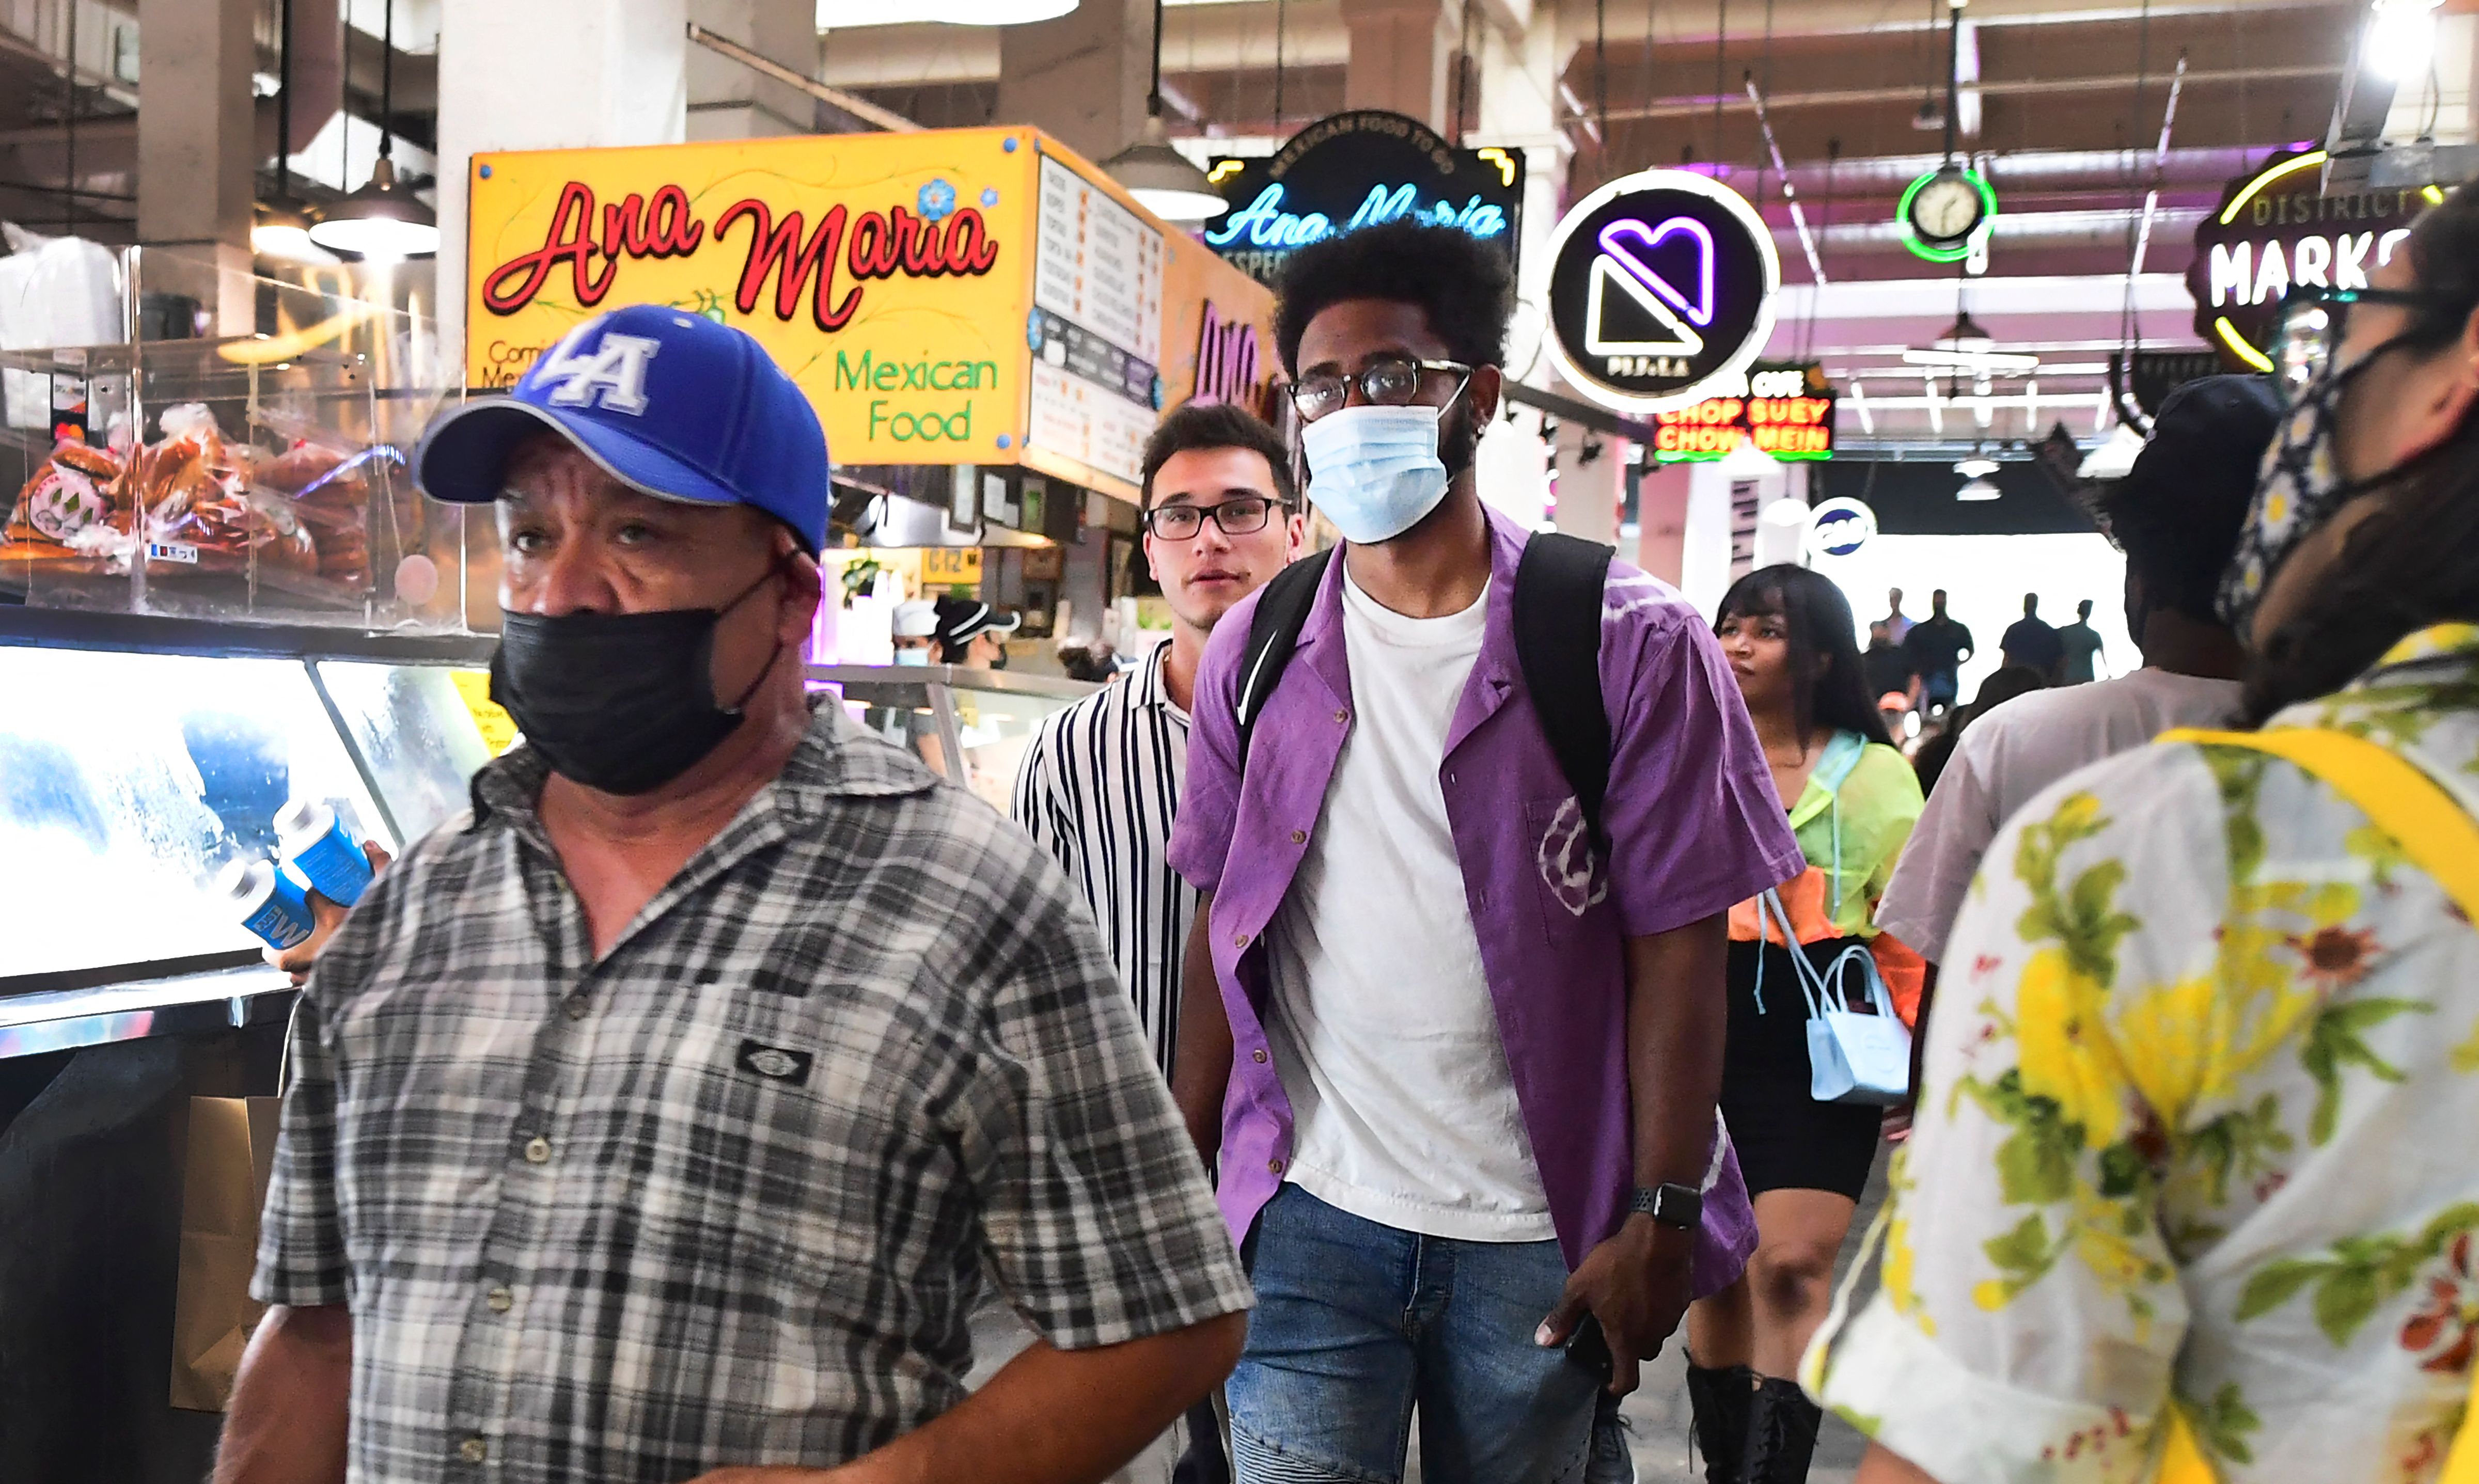 Masked and unmasked people make their way through Grand Central Market in Los Angeles, California on June 29, 2021 as World Health Organization (WHO) urges fully vaccinated people to continue wearing masks with the rapid spread of the Delta variant. - Officials are issuing new mask guidance as Covid-19 cases are spiking in parts of the US, especially in areas with low vaccination rates due to the more contagious Delta variant.